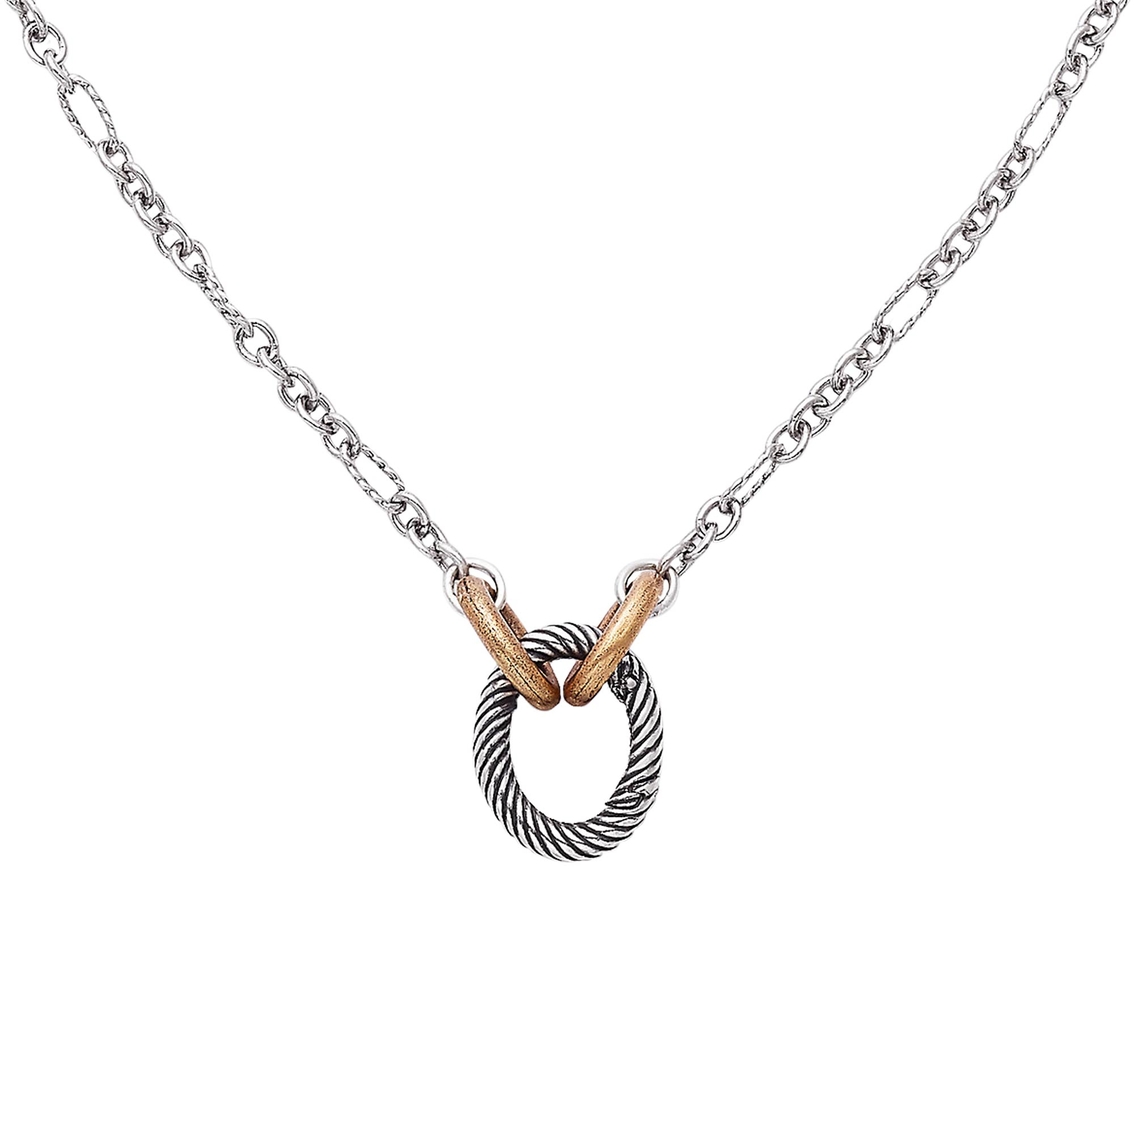 James Avery Oval Twist Changeable Charm Holder Necklace 18 in. - Image 2 of 3